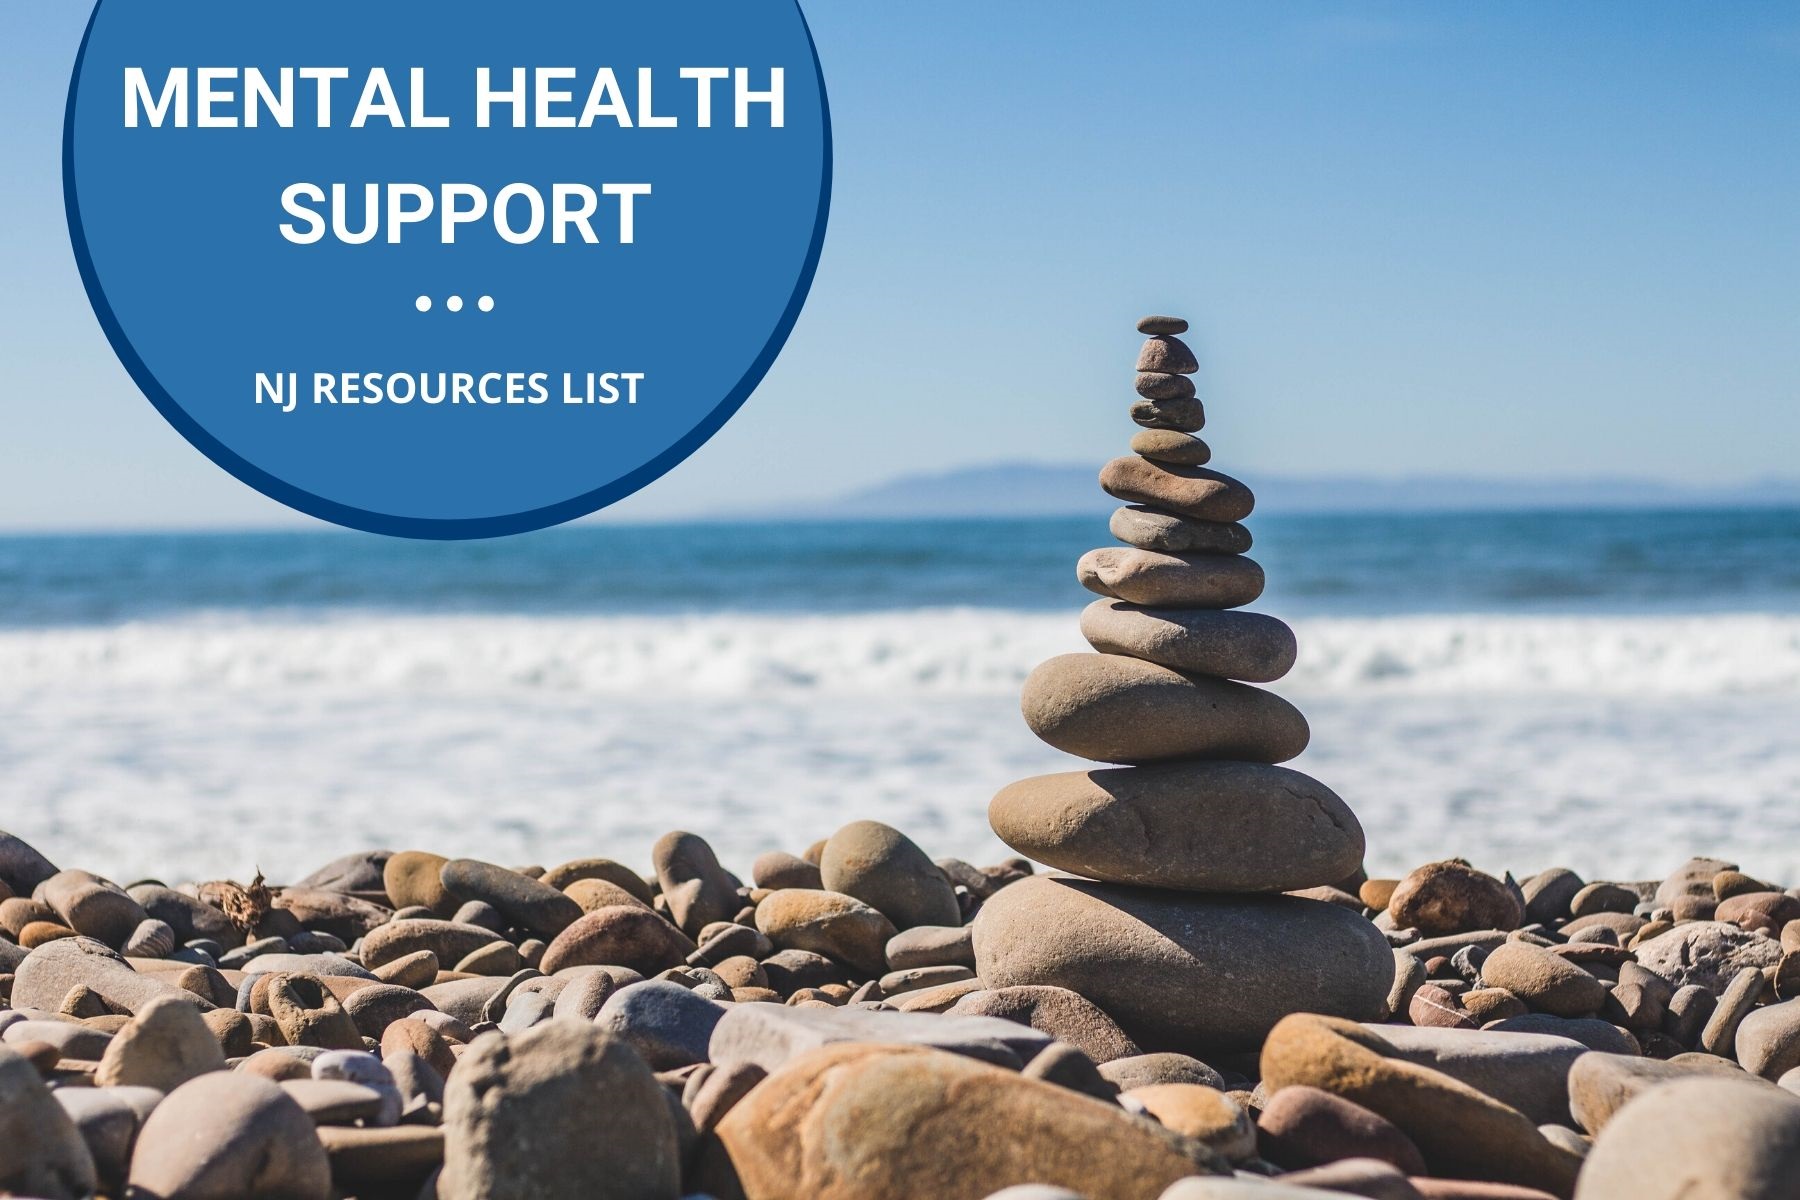 Mental health care support